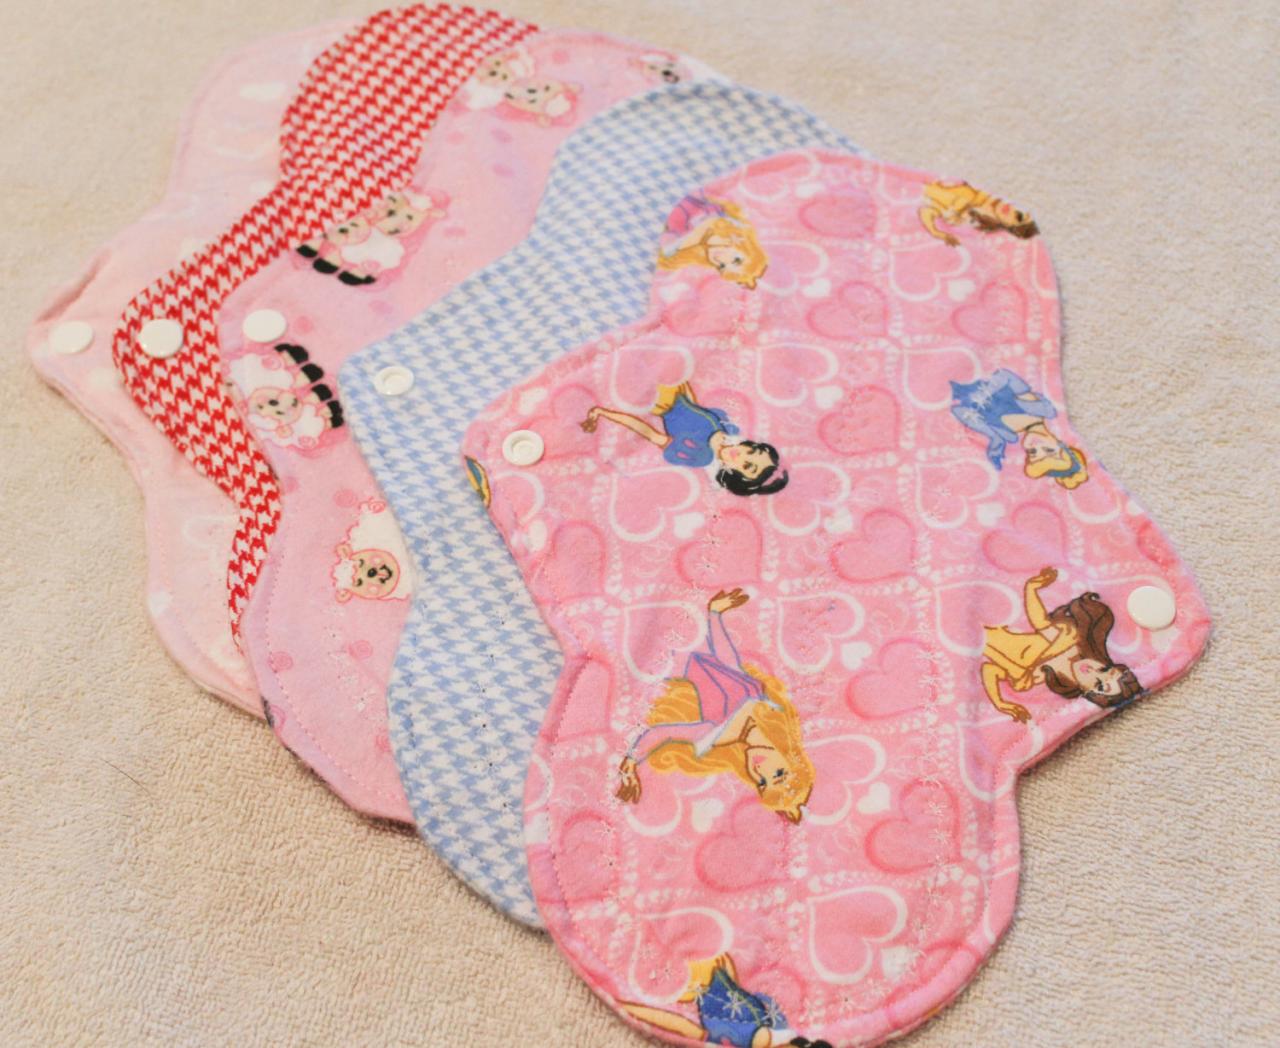 Five, 10 Inch Washable Menstrual Pads Choose Your Print